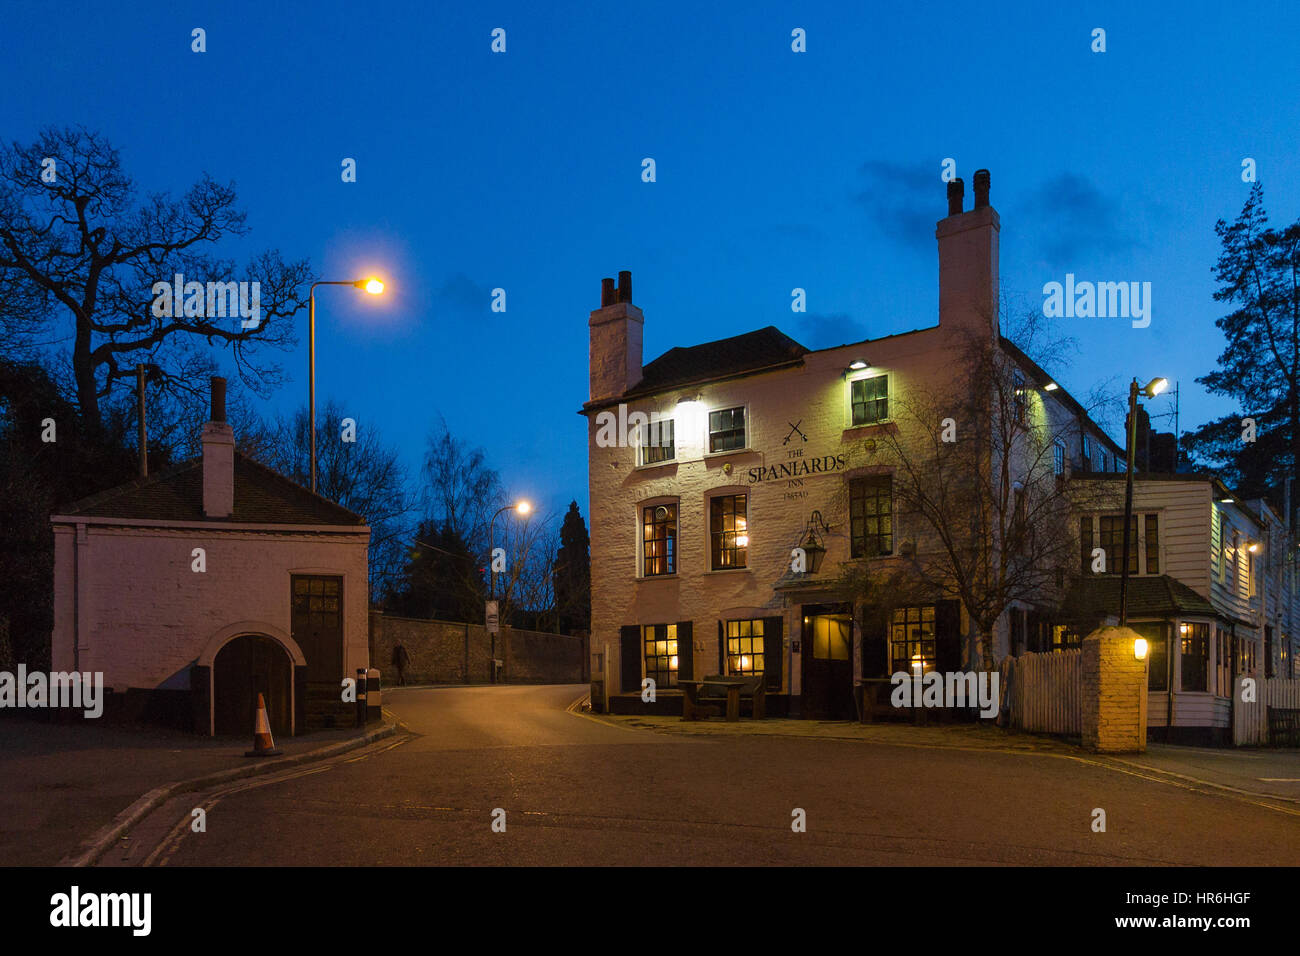 The Spaniards Inn in Hampstead, London at blue hour in winter Stock Photo